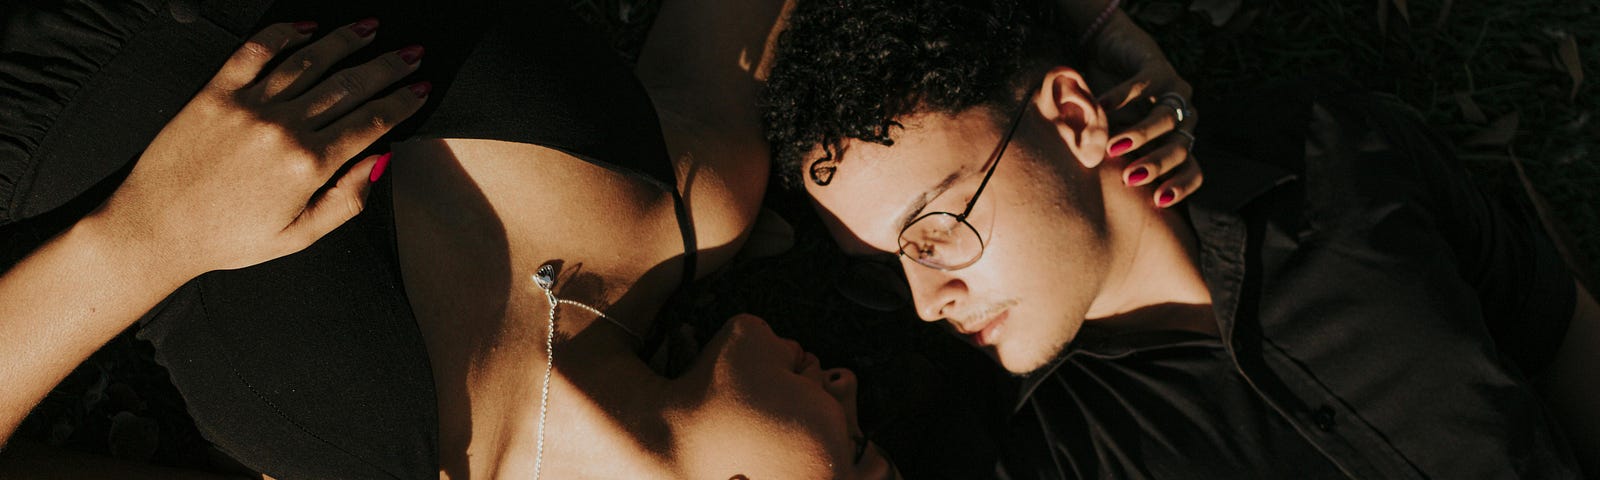 Couple in an intimate pose, wearing black.